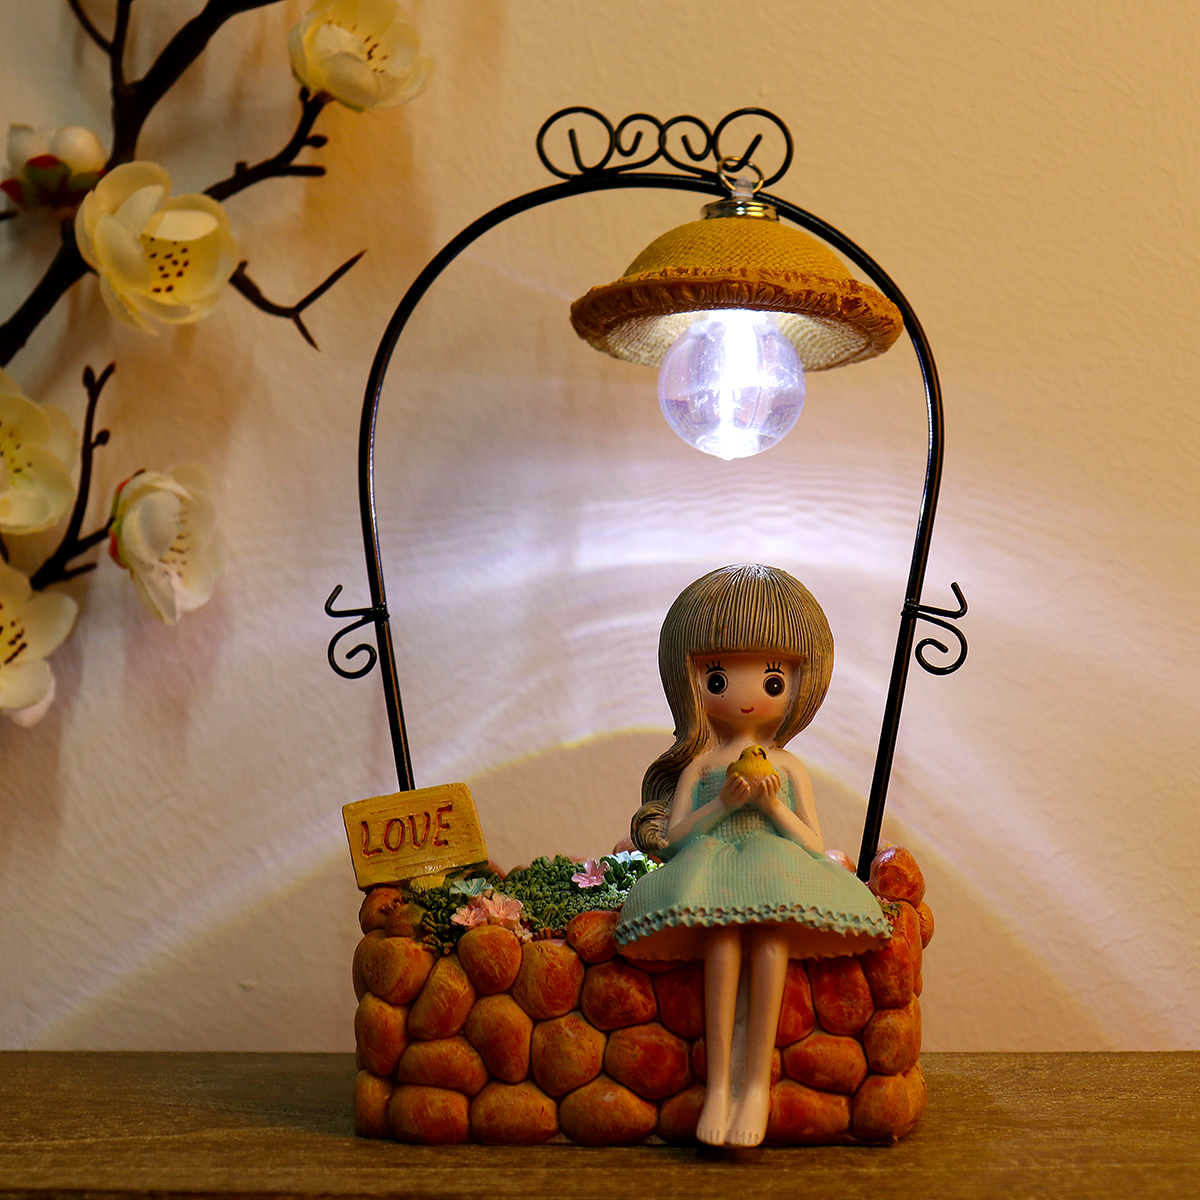 Creative-Farm-Girl-Table-Night-Light-Resin-Craft-Character-Ornaments-Xmas-Gifts-1640922-6